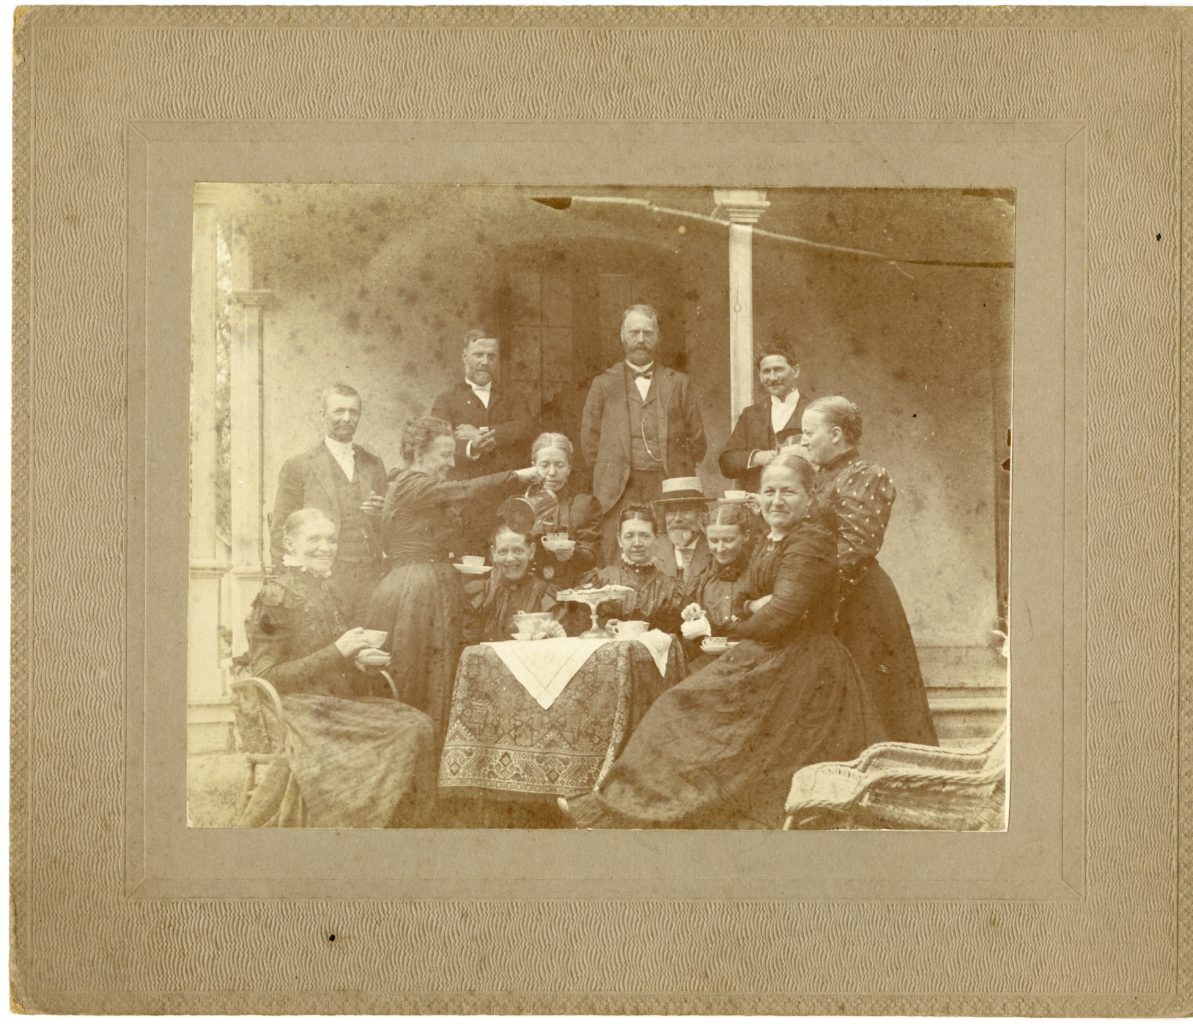 Small group of men and women gather for tea outside around table.